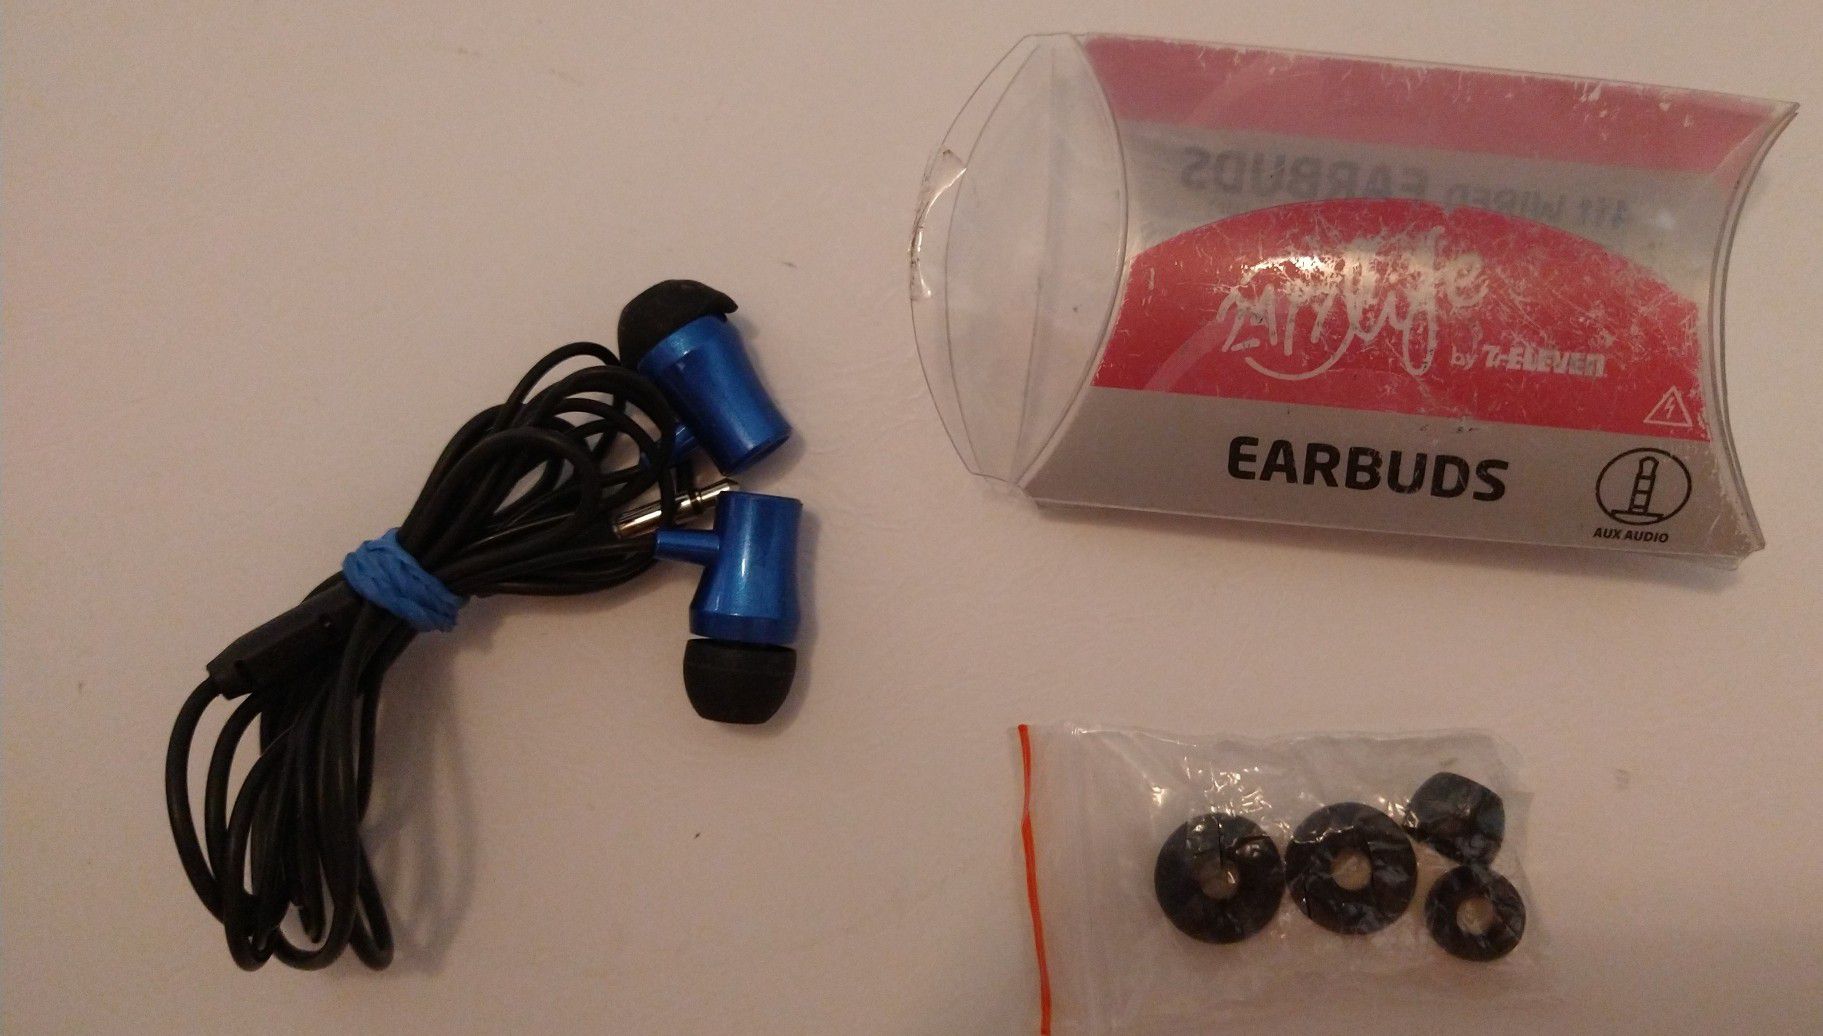 Earbuds with extra earpieces